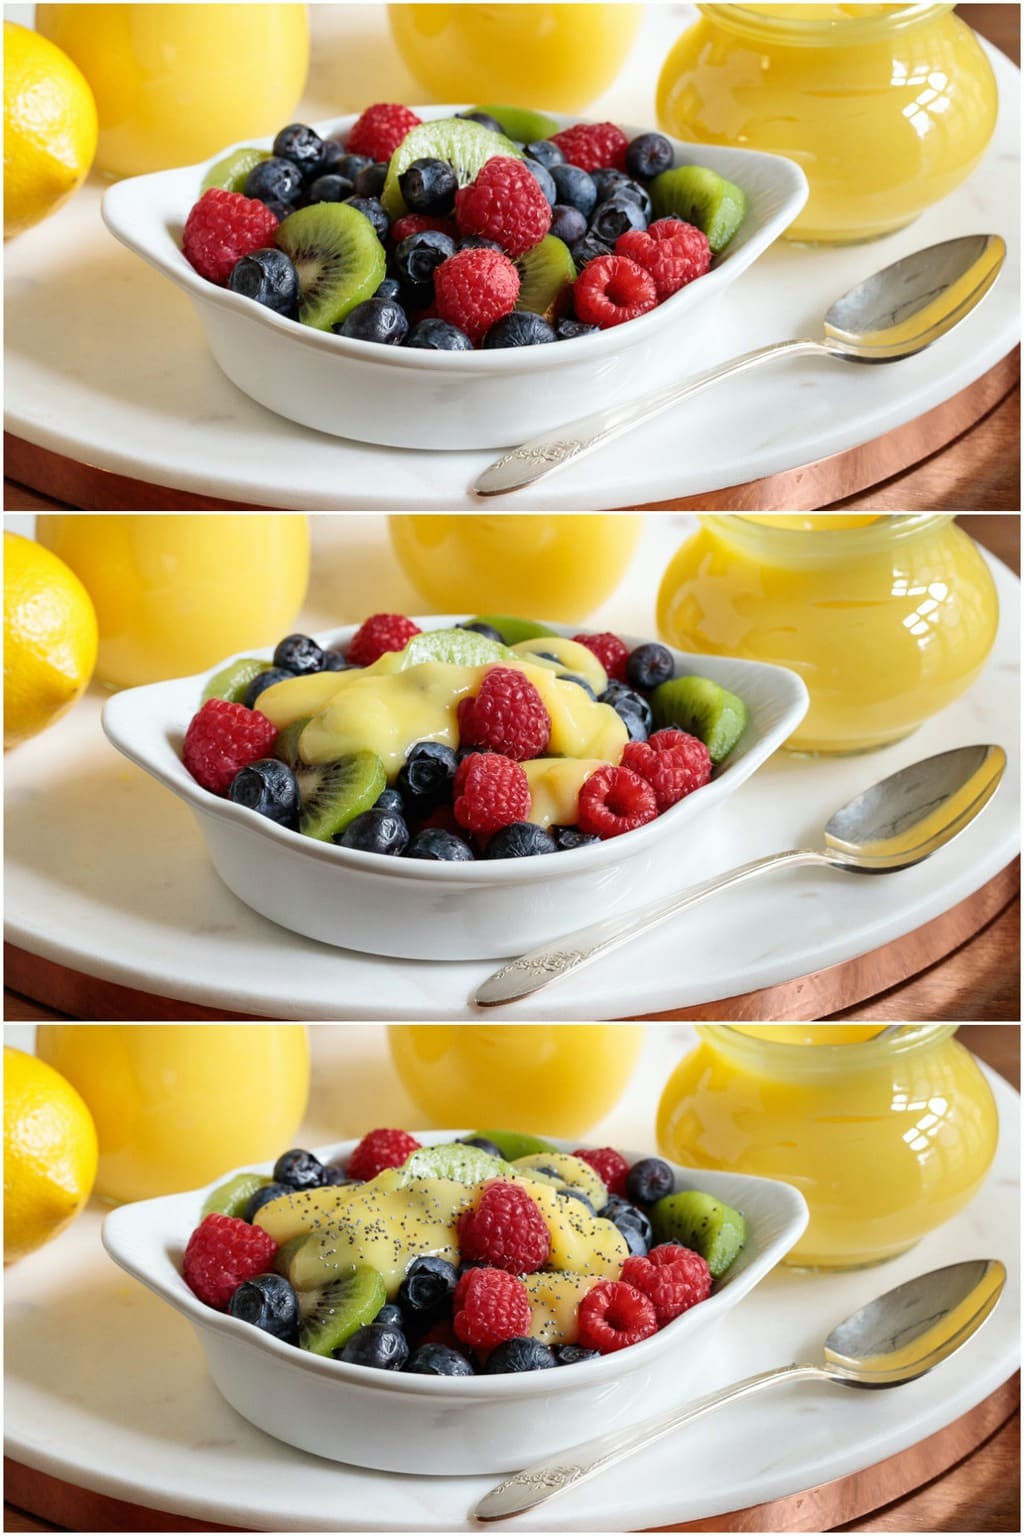 Photo collage of a dish of fresh fruit with Ridiculously Easy Microwave Lemon Curd on top and a sprinkle of poppy seeds on top of the fruit and curd.